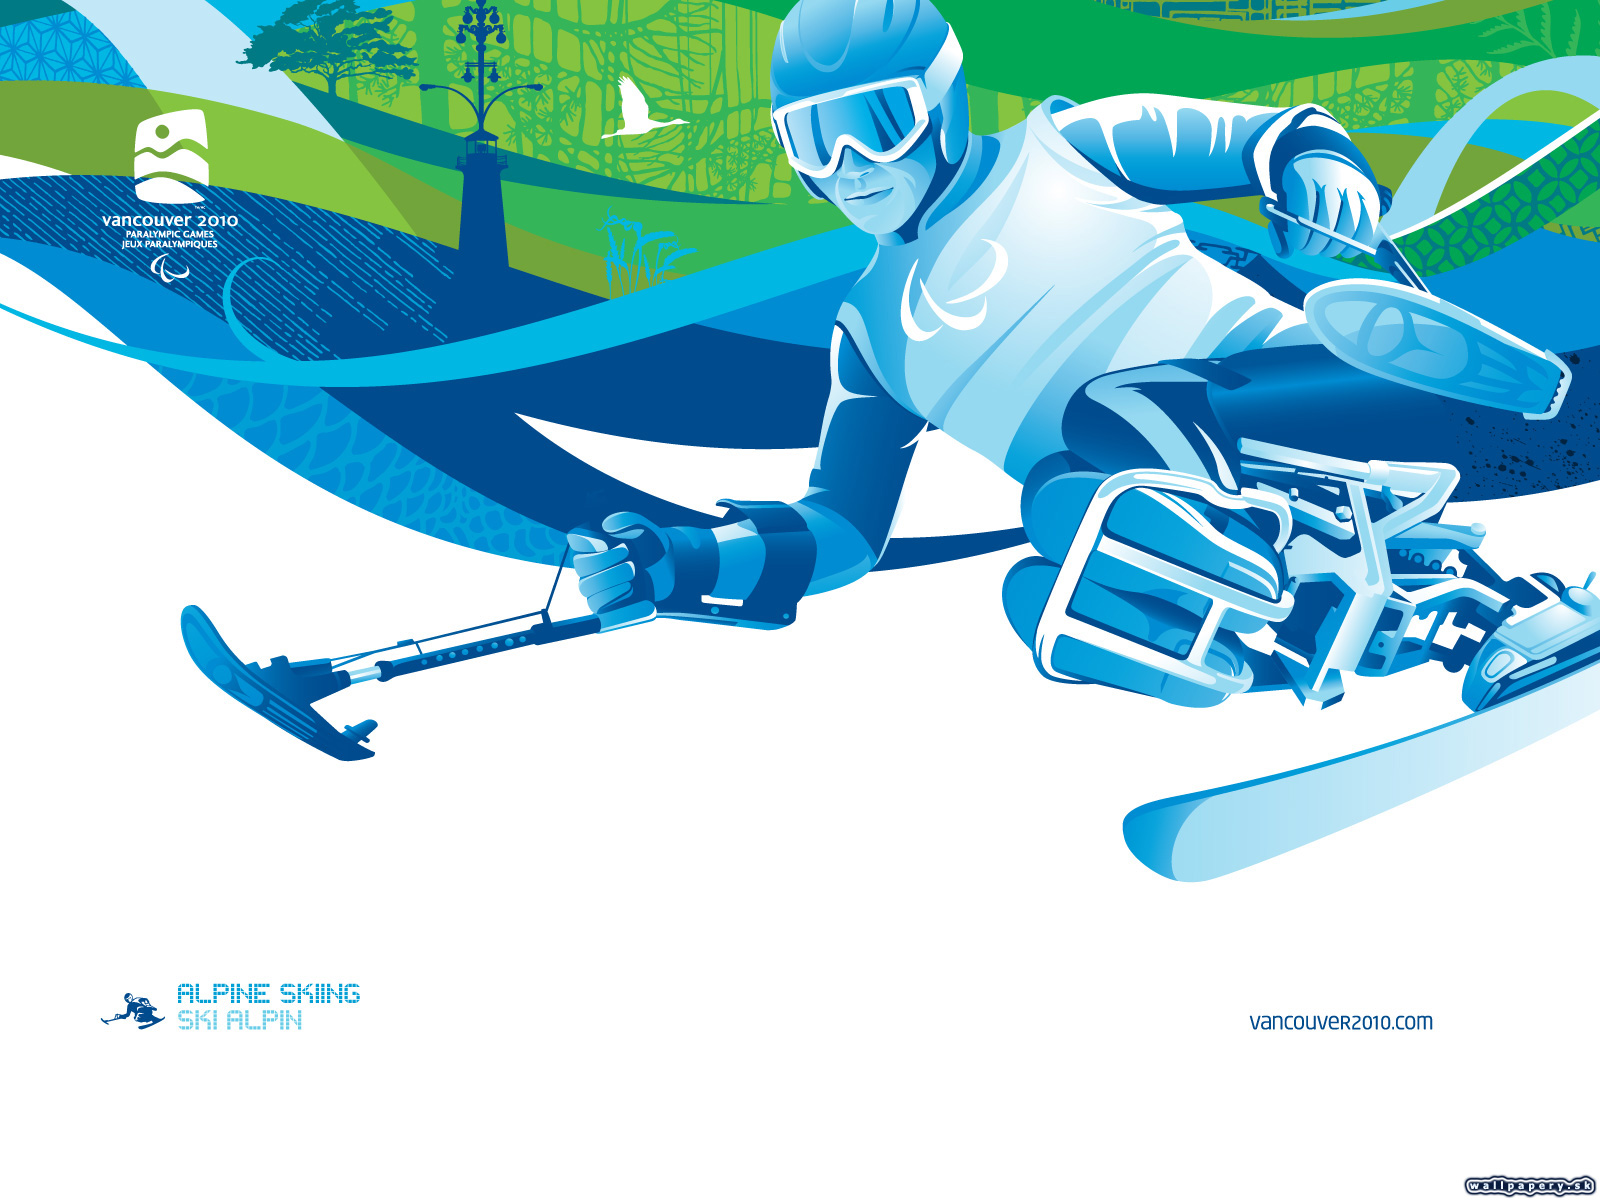 Vancouver 2010 - The Official Video Game of the Olympic Winter Games - wallpaper 25